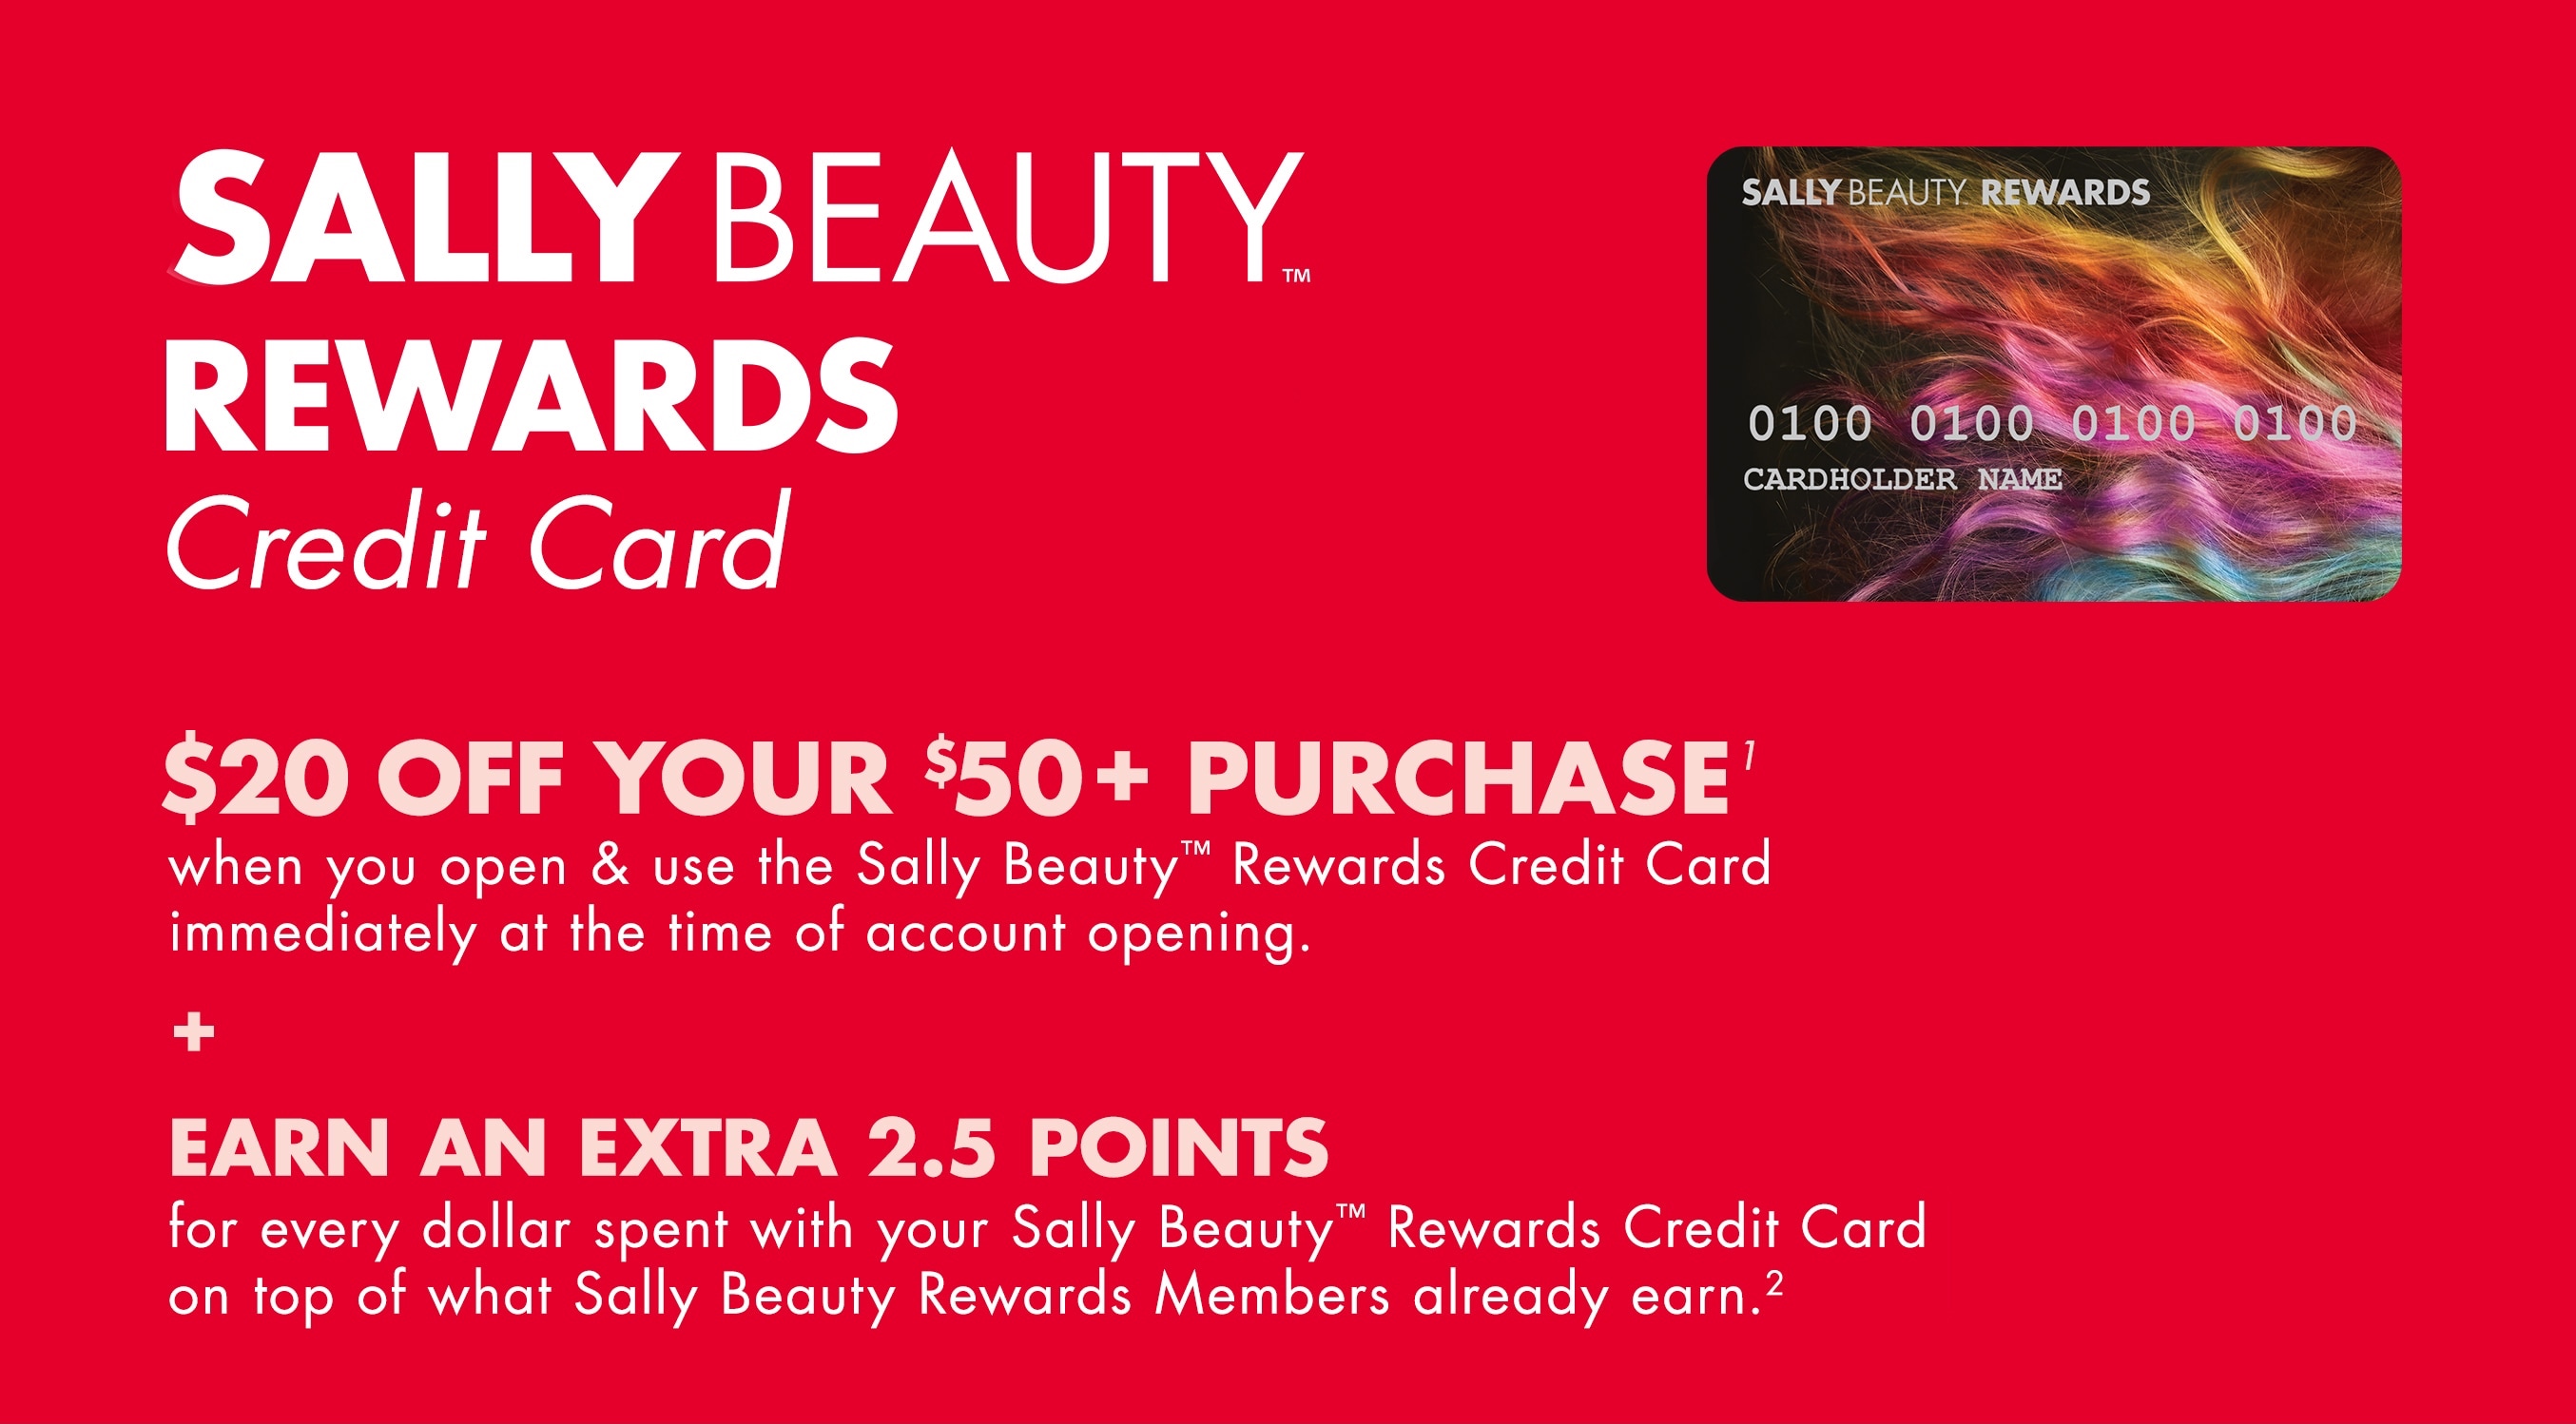 Sally Beauty Rewards credit card. Receive $20 off your purchase of $50 or more when you open and use the sally beauty rewards credit card immediately at the time of opening.n Plus, earn an extra 2.5 points for every dollar spent with your sally beauty rewards credit card on top of what sally beauty rewards nmembers already earn.